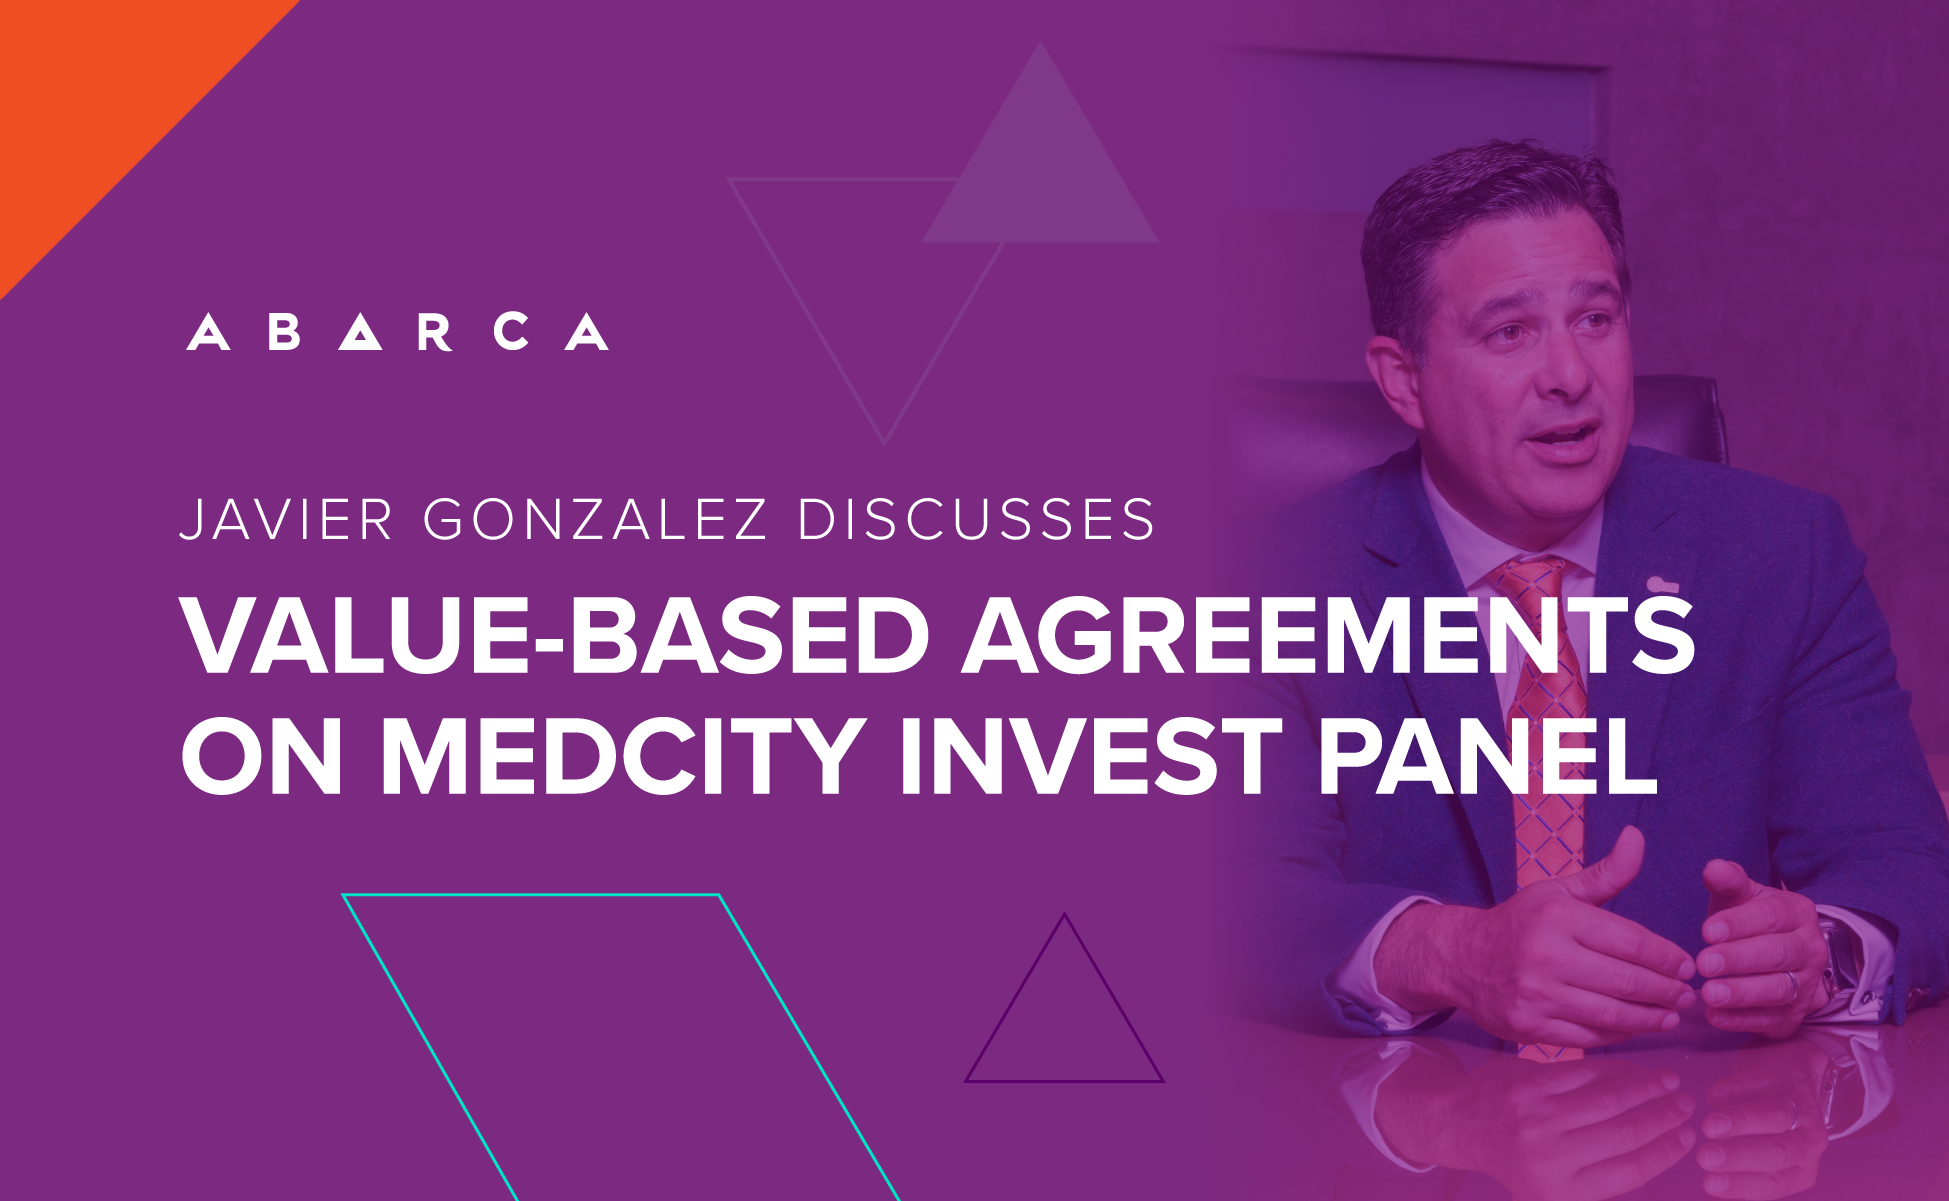 Javier Gonzalez discusses value-based agreements on MedCity INVEST panel